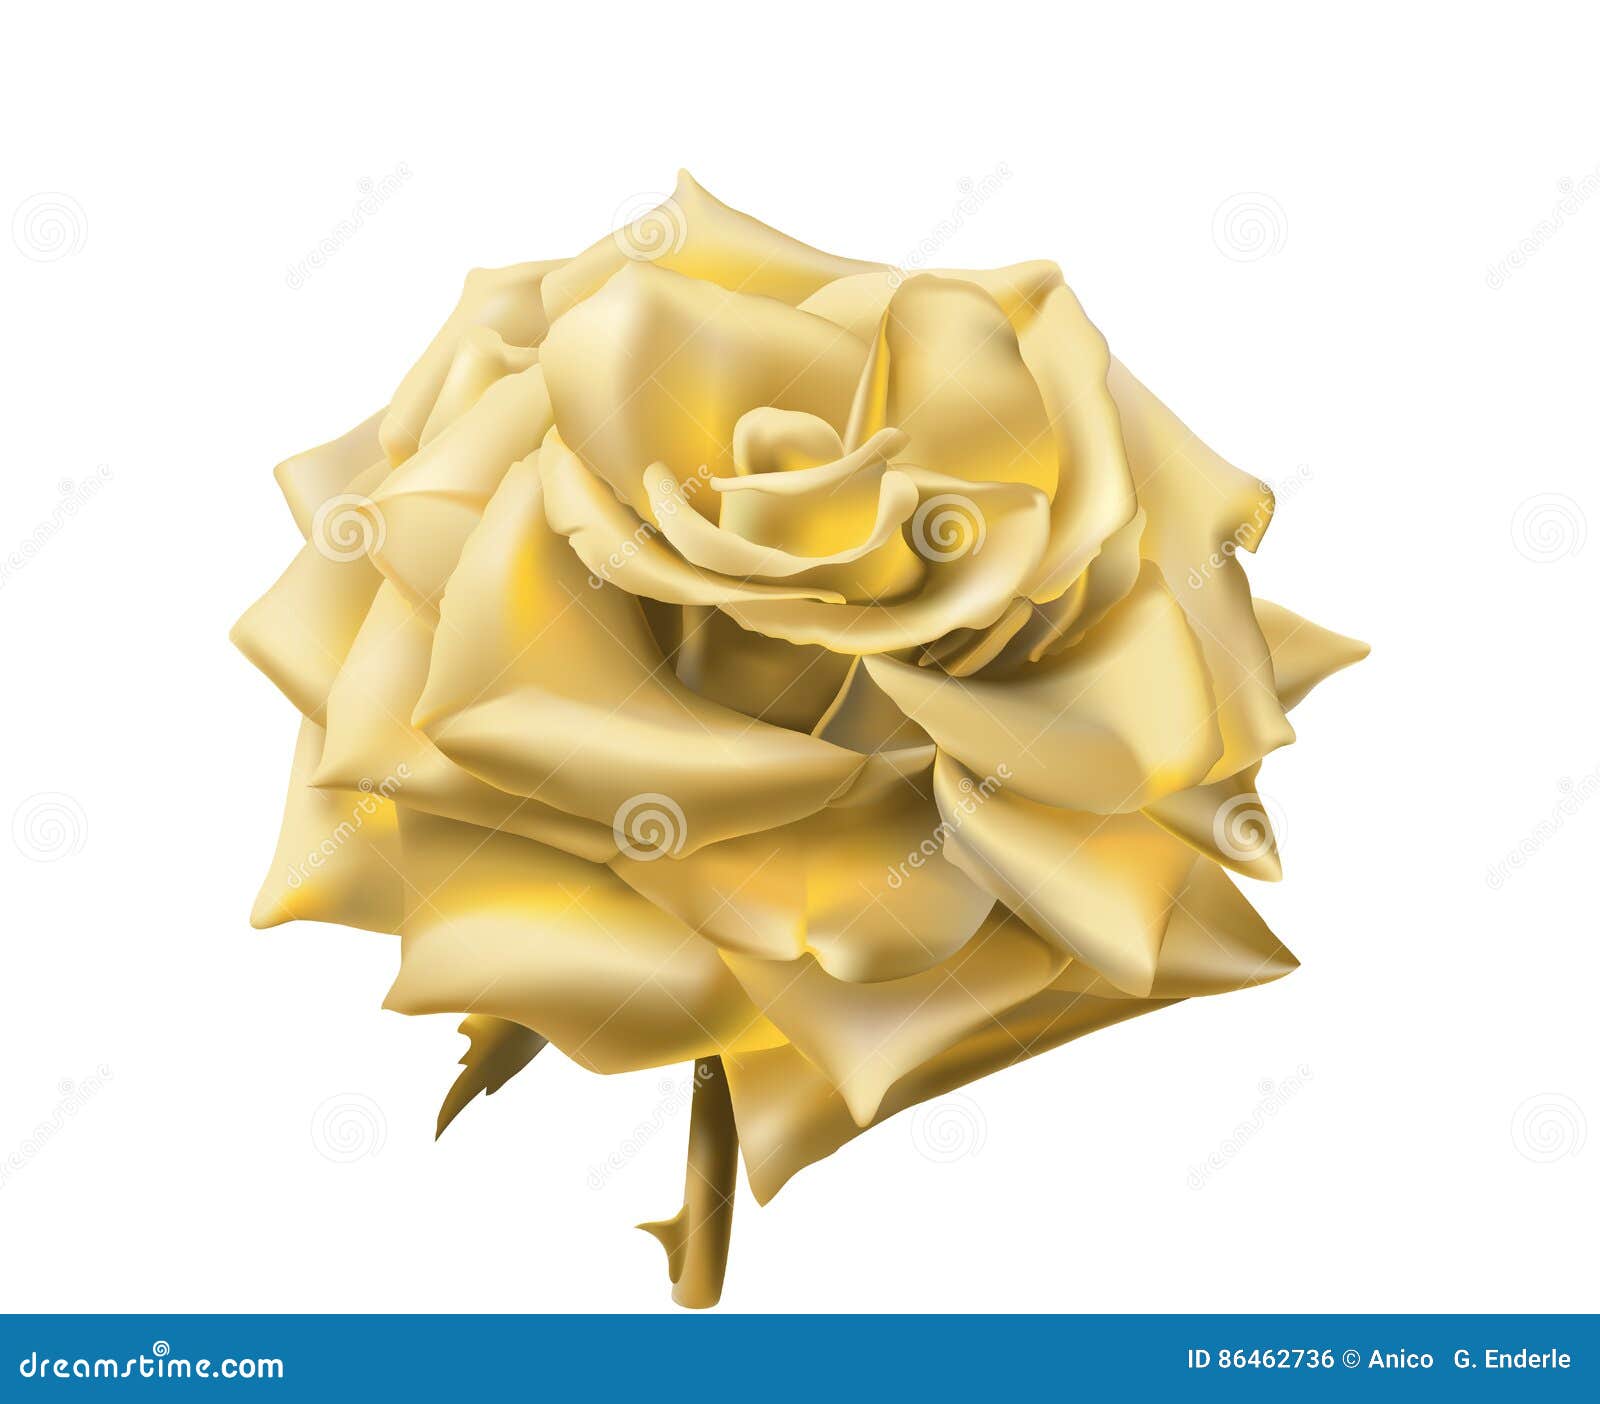 Gold Rose. stock vector. Illustration of nature, drawn - 86462736